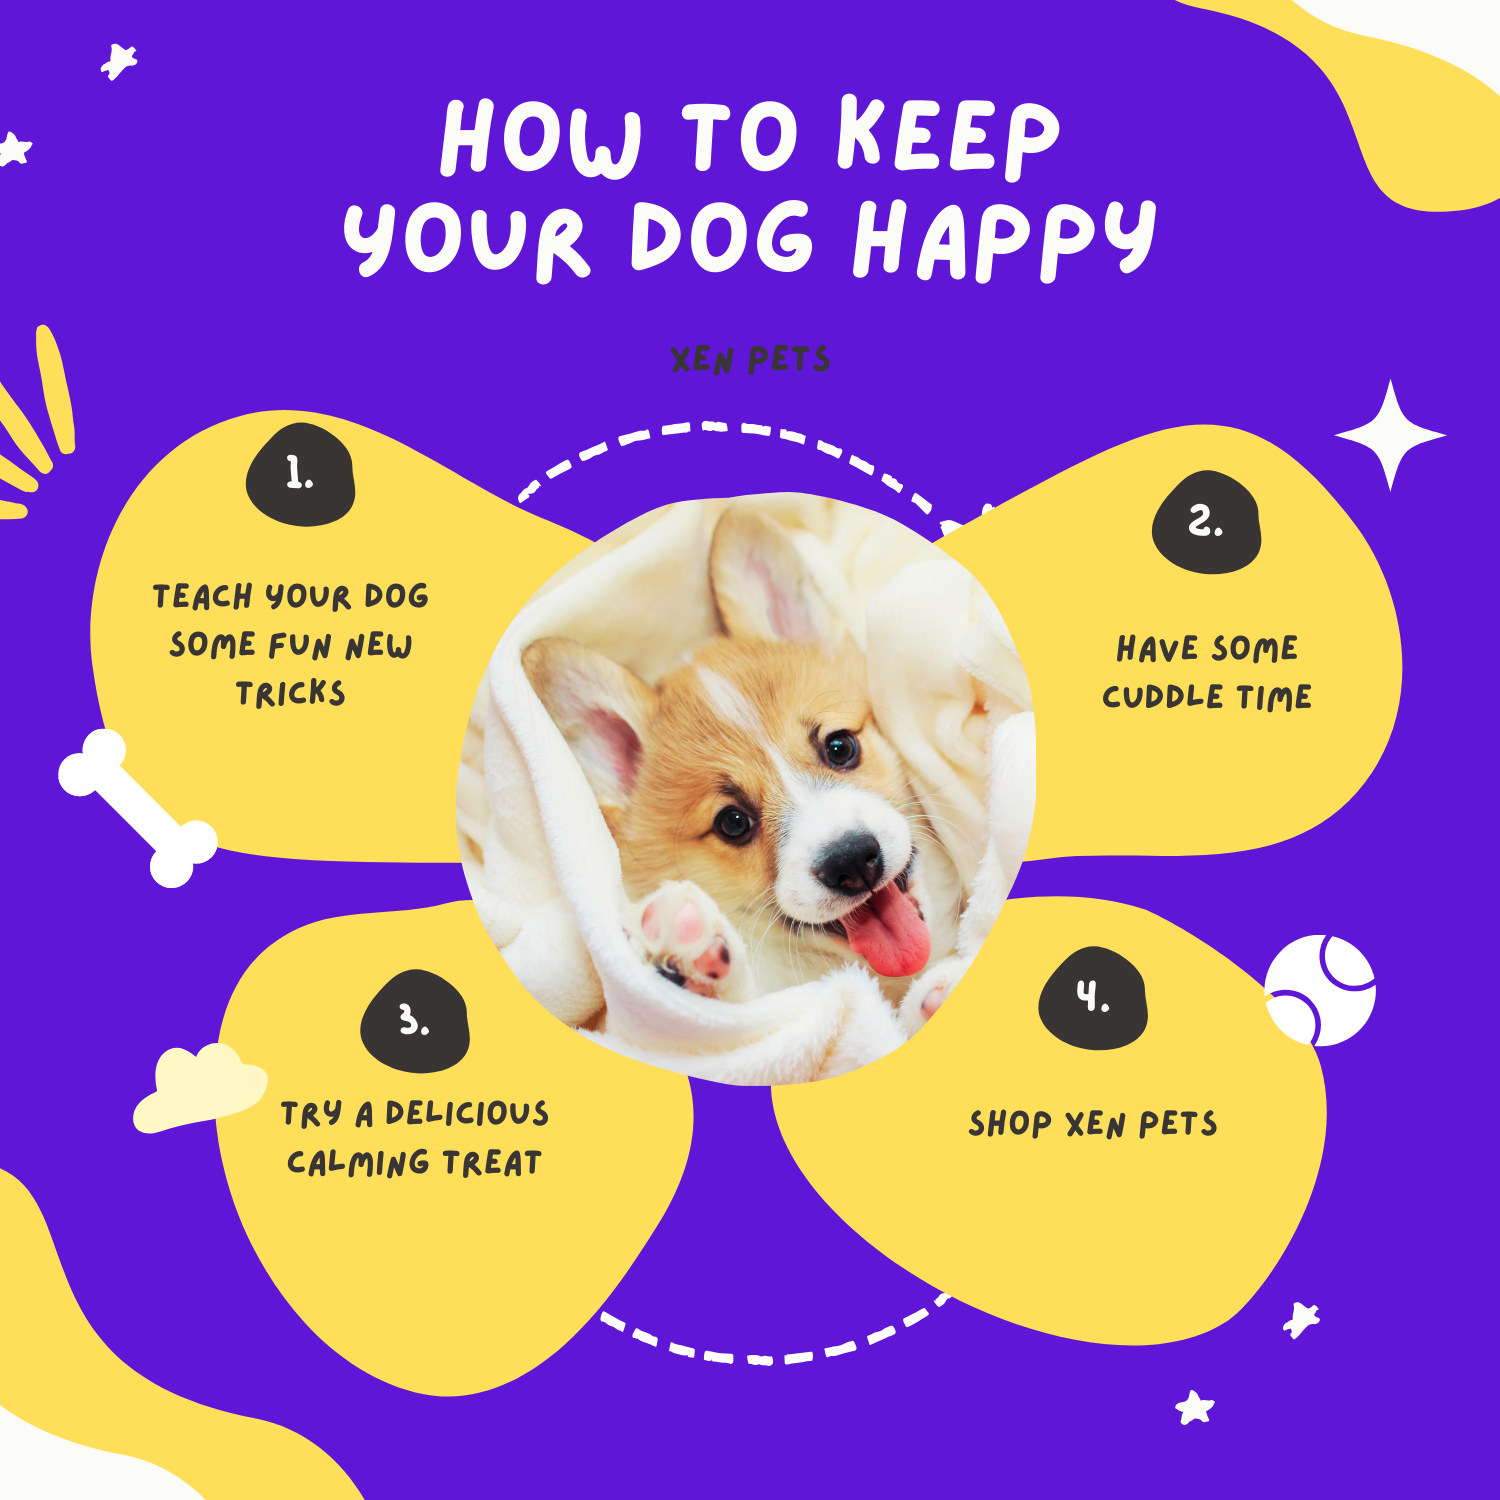 How to keep your dog happy